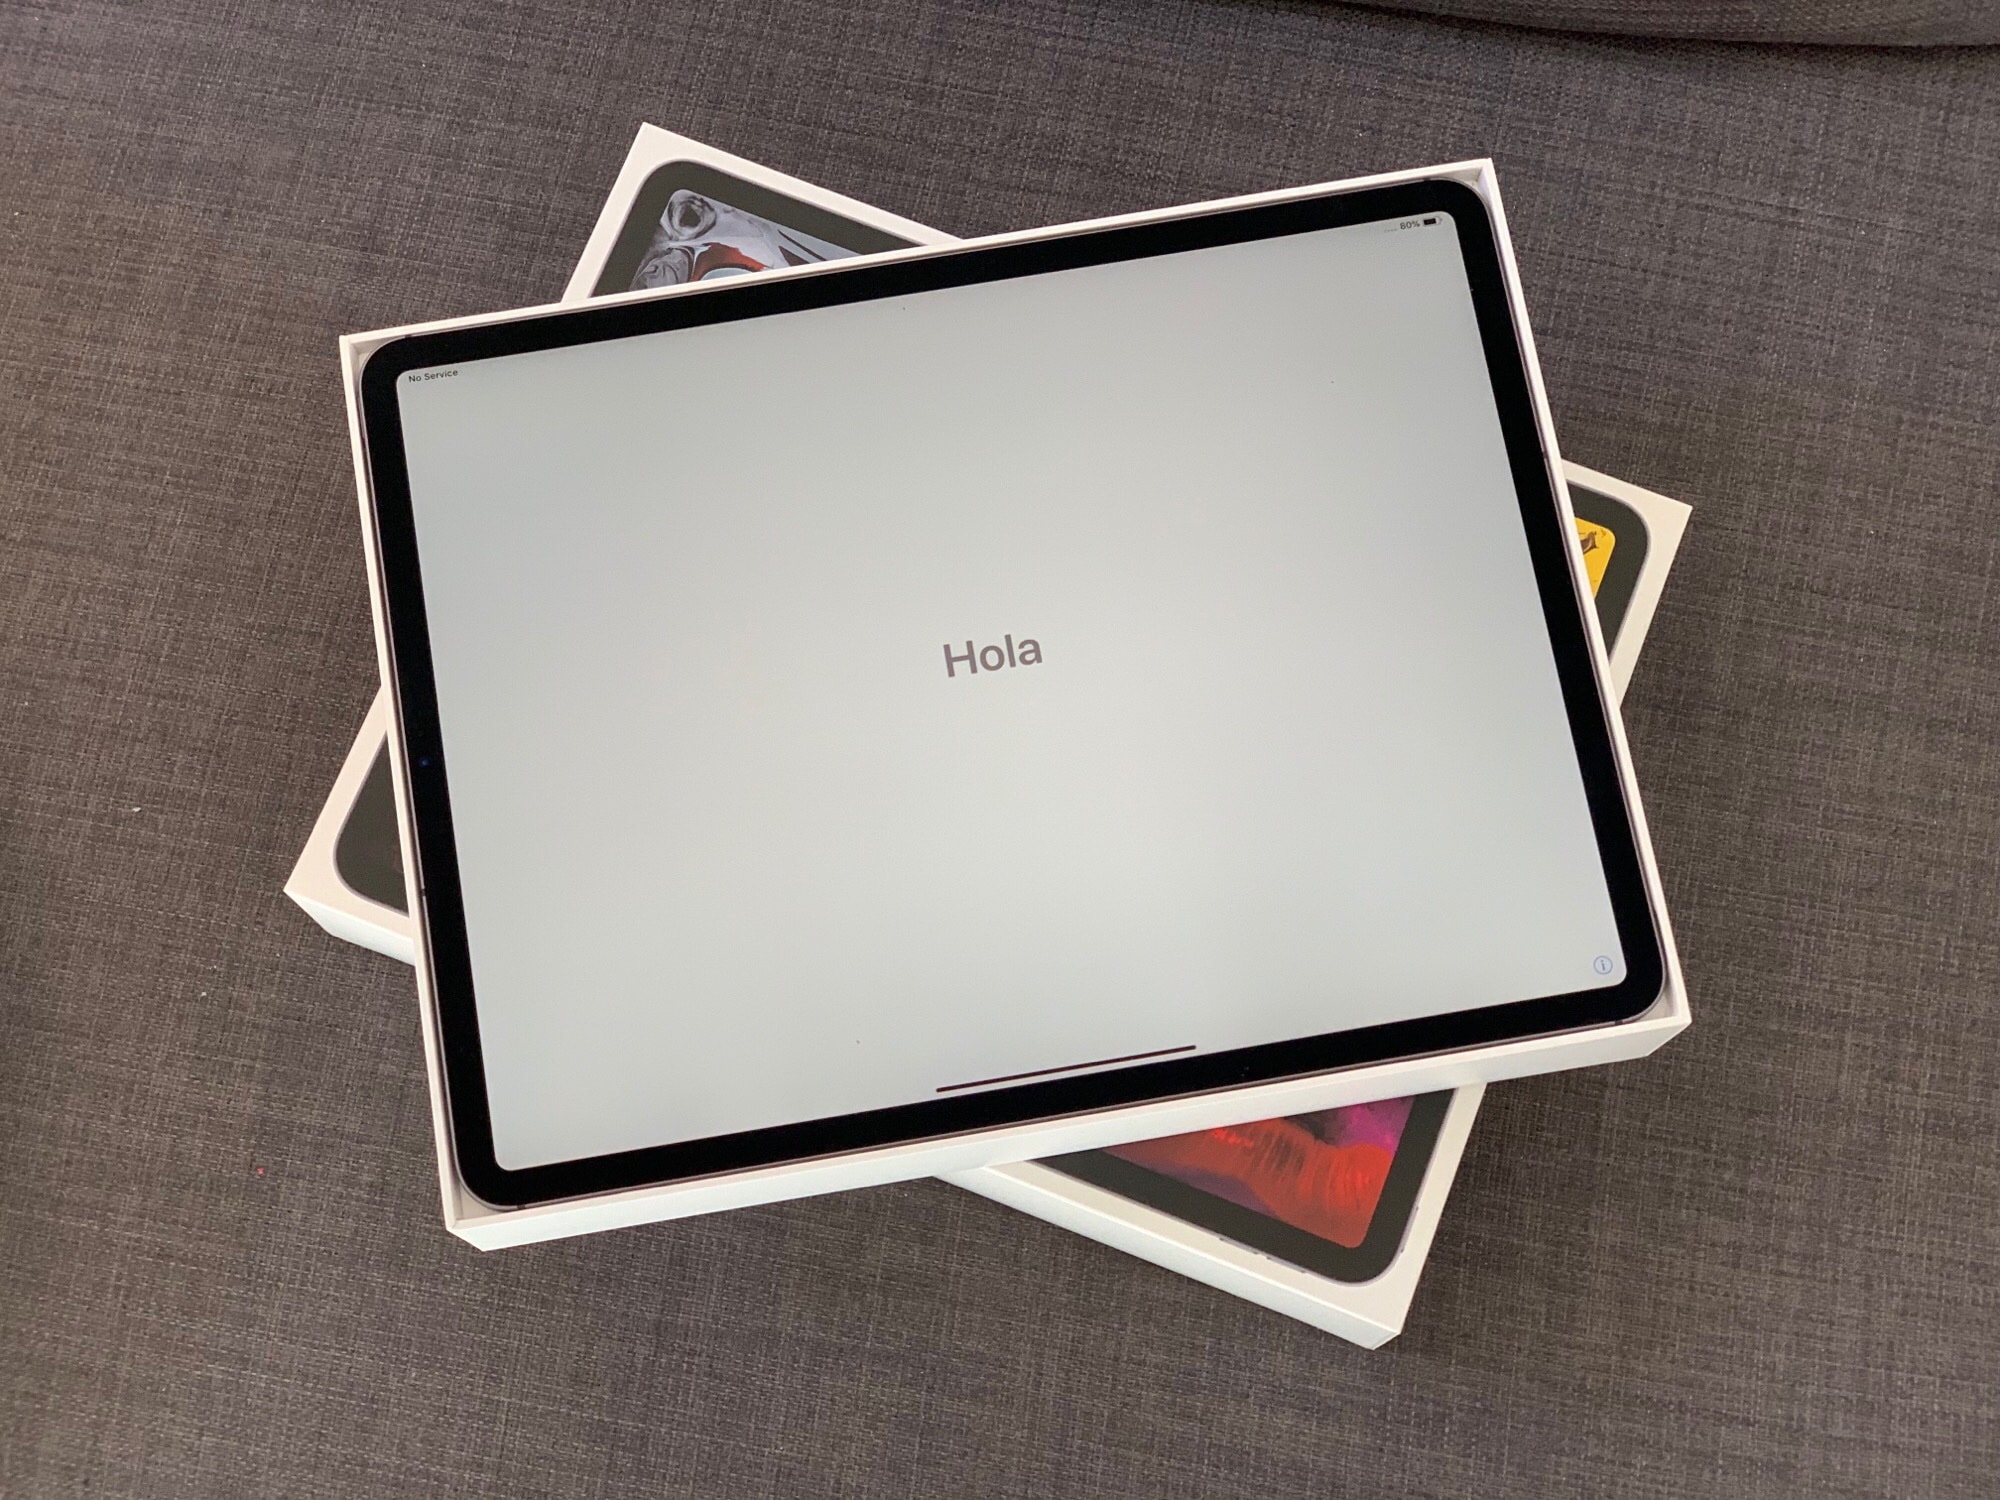 The 12.9-inch iPad Pro screen really is beautiful.